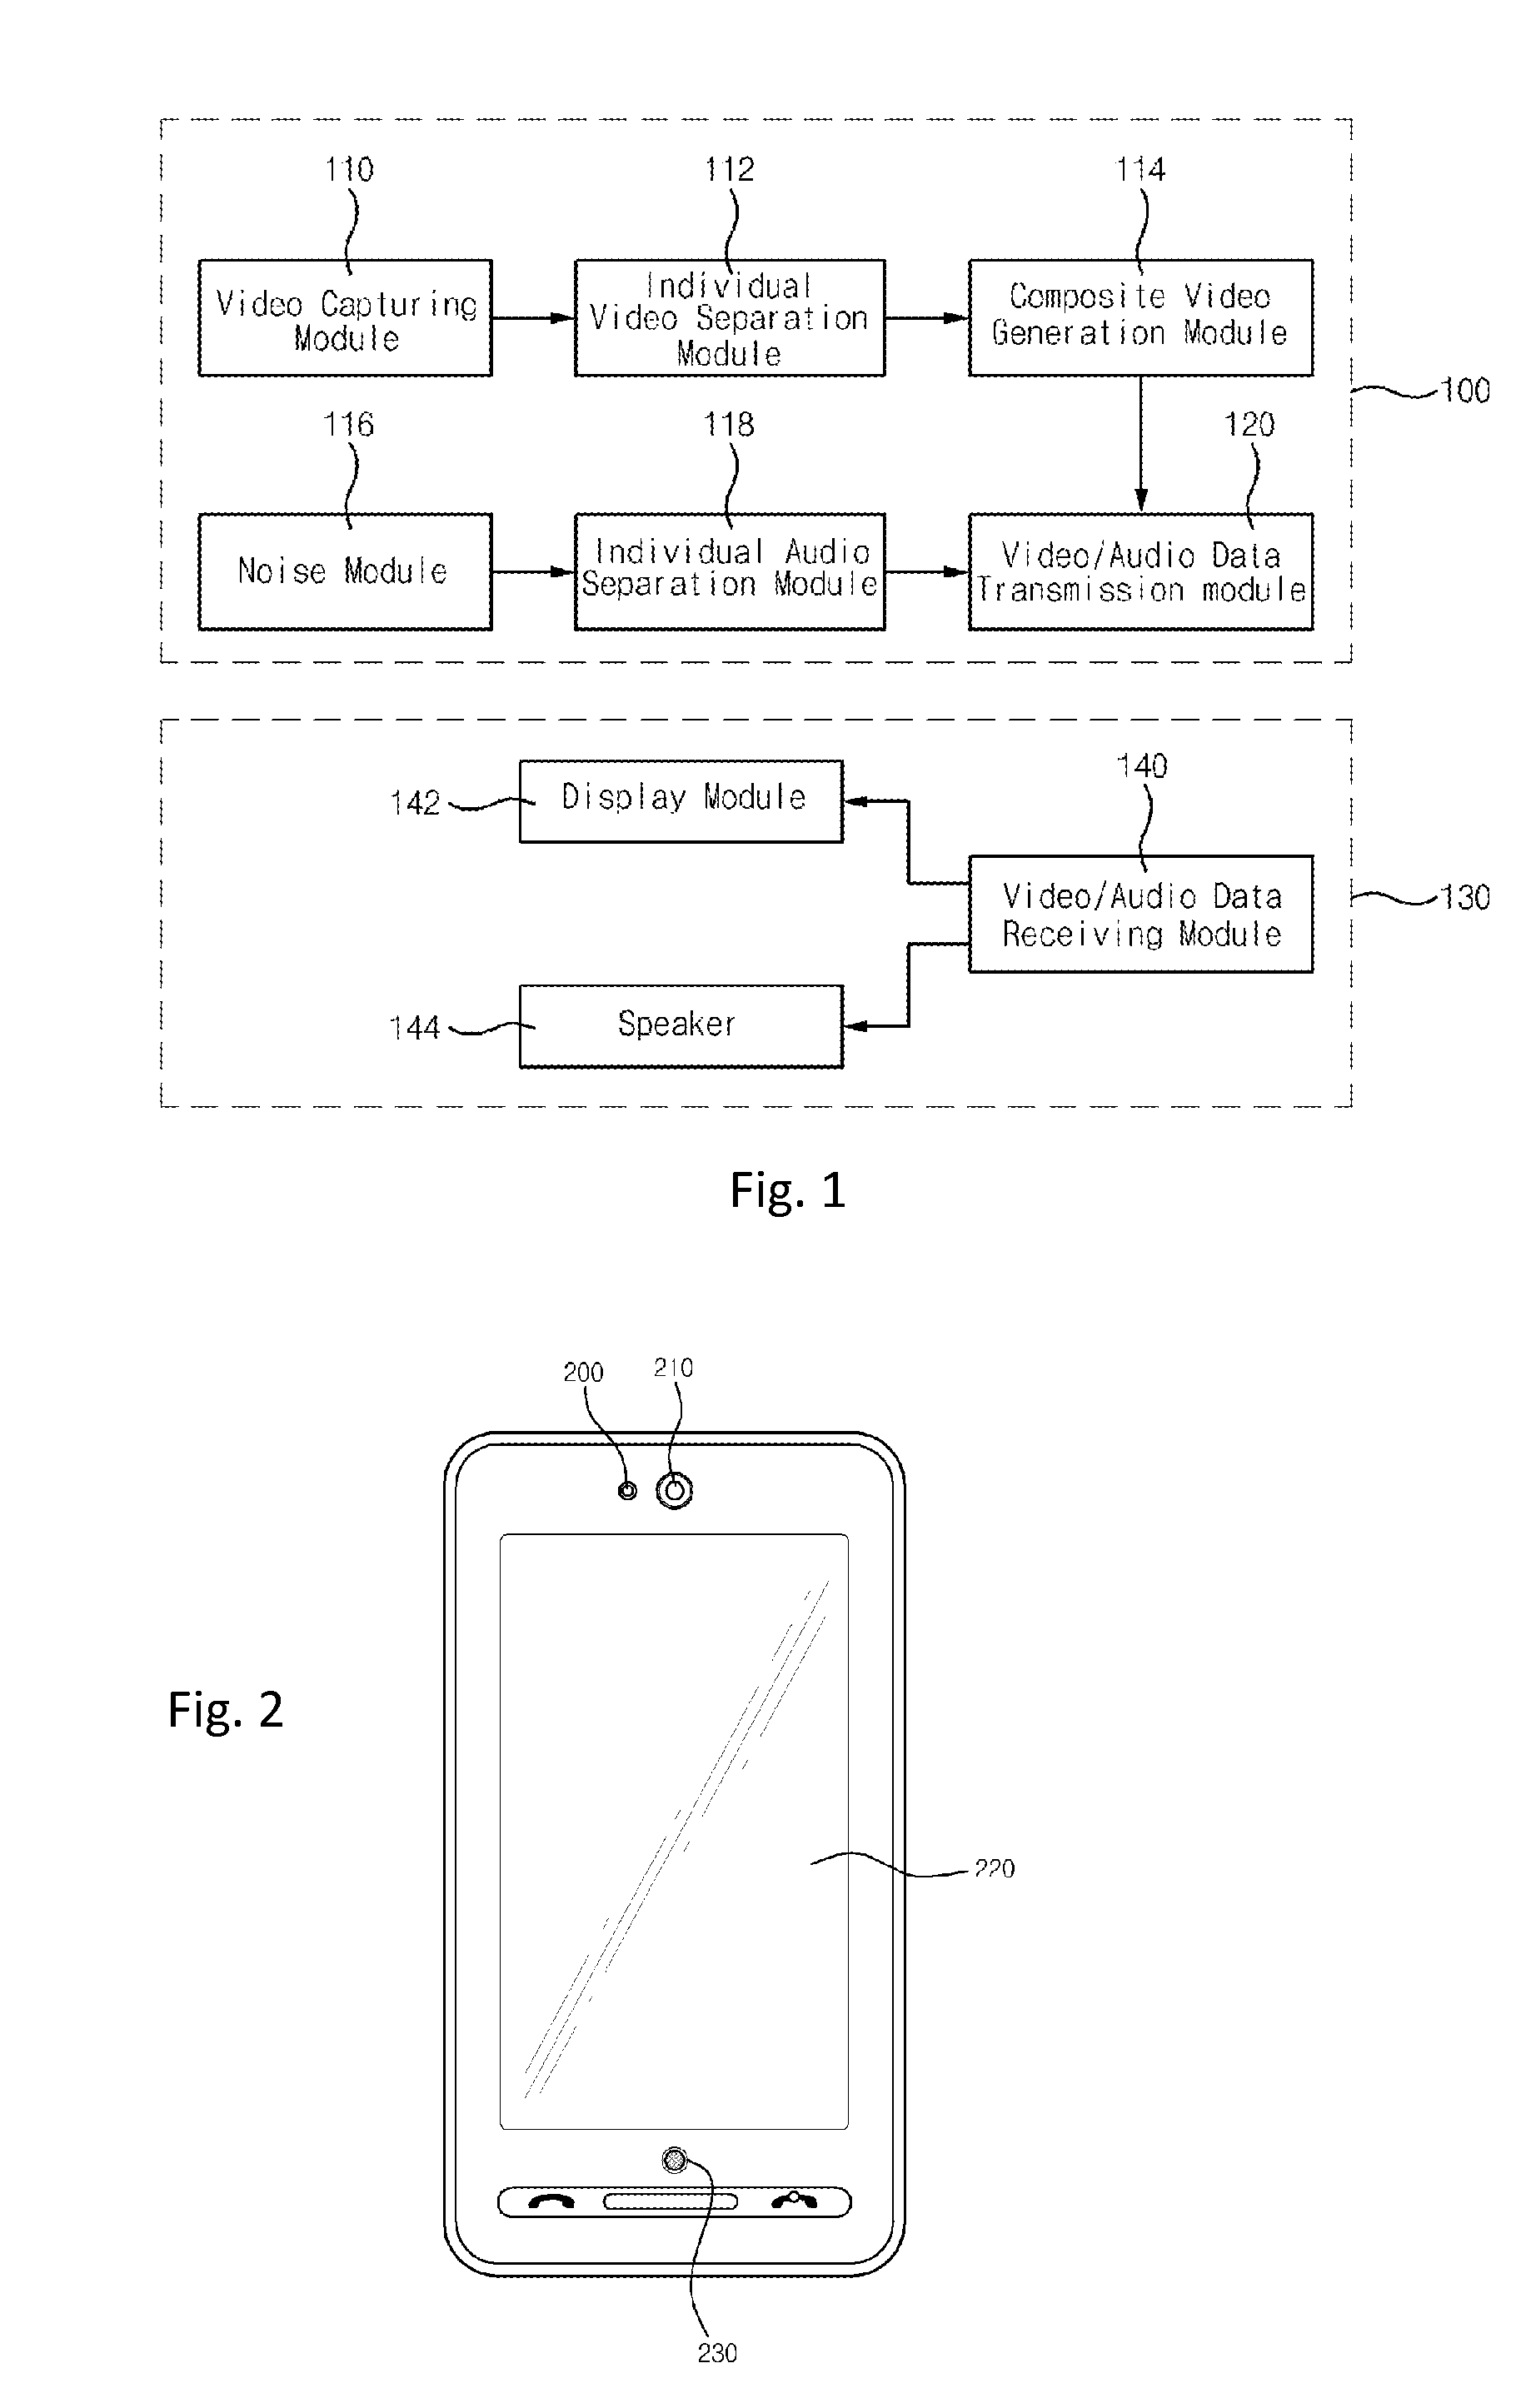 Mobile terminal and method of providing video calls using the same